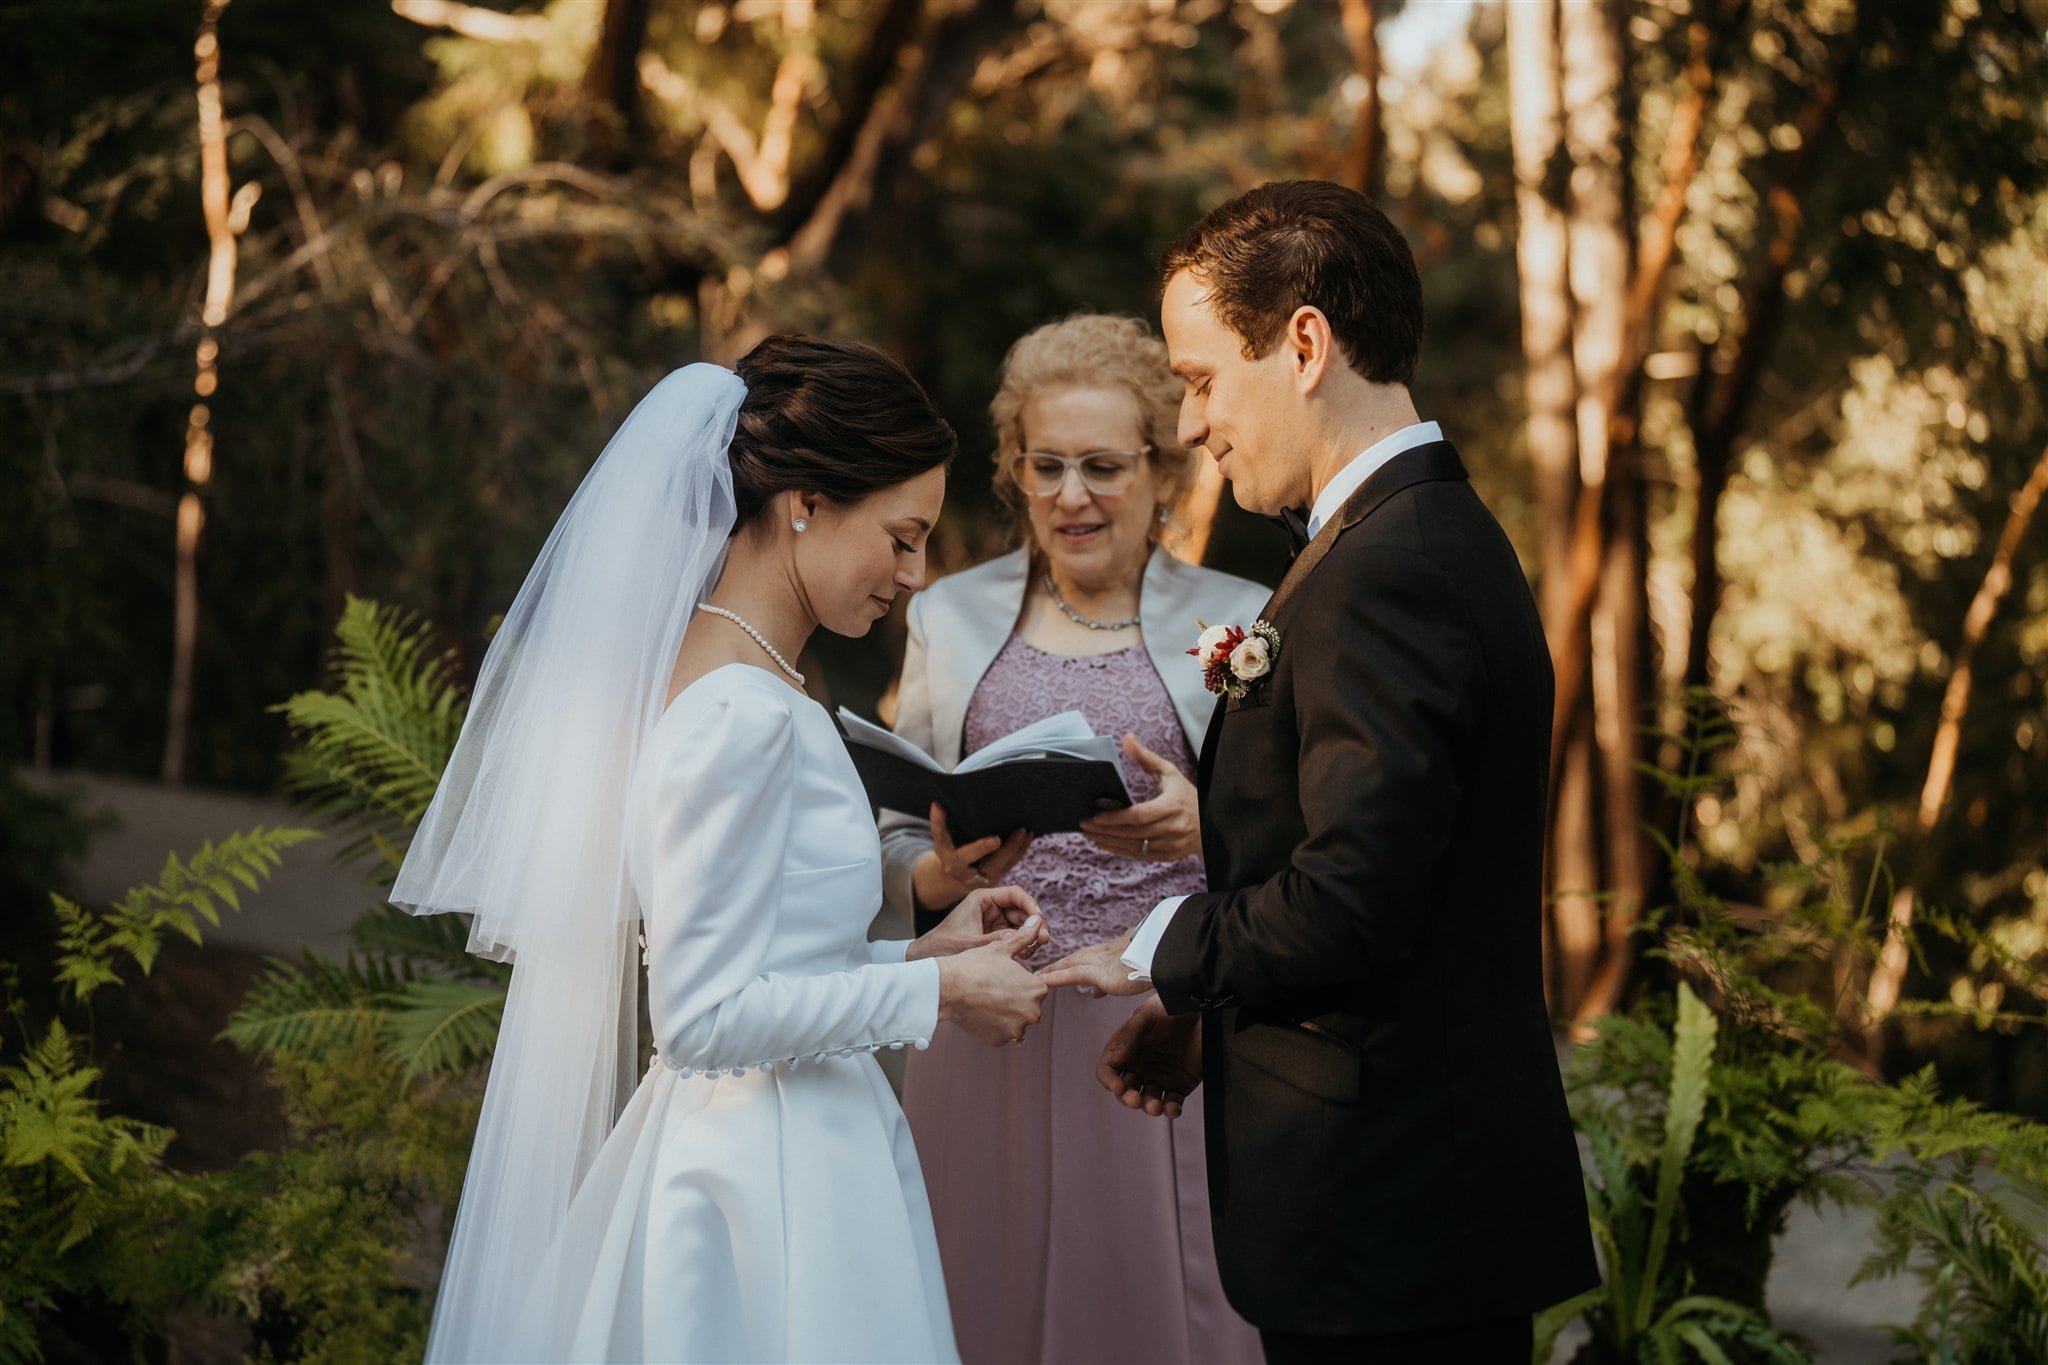 Bride and groom exchange rings at California micro wedding ceremony in the forest